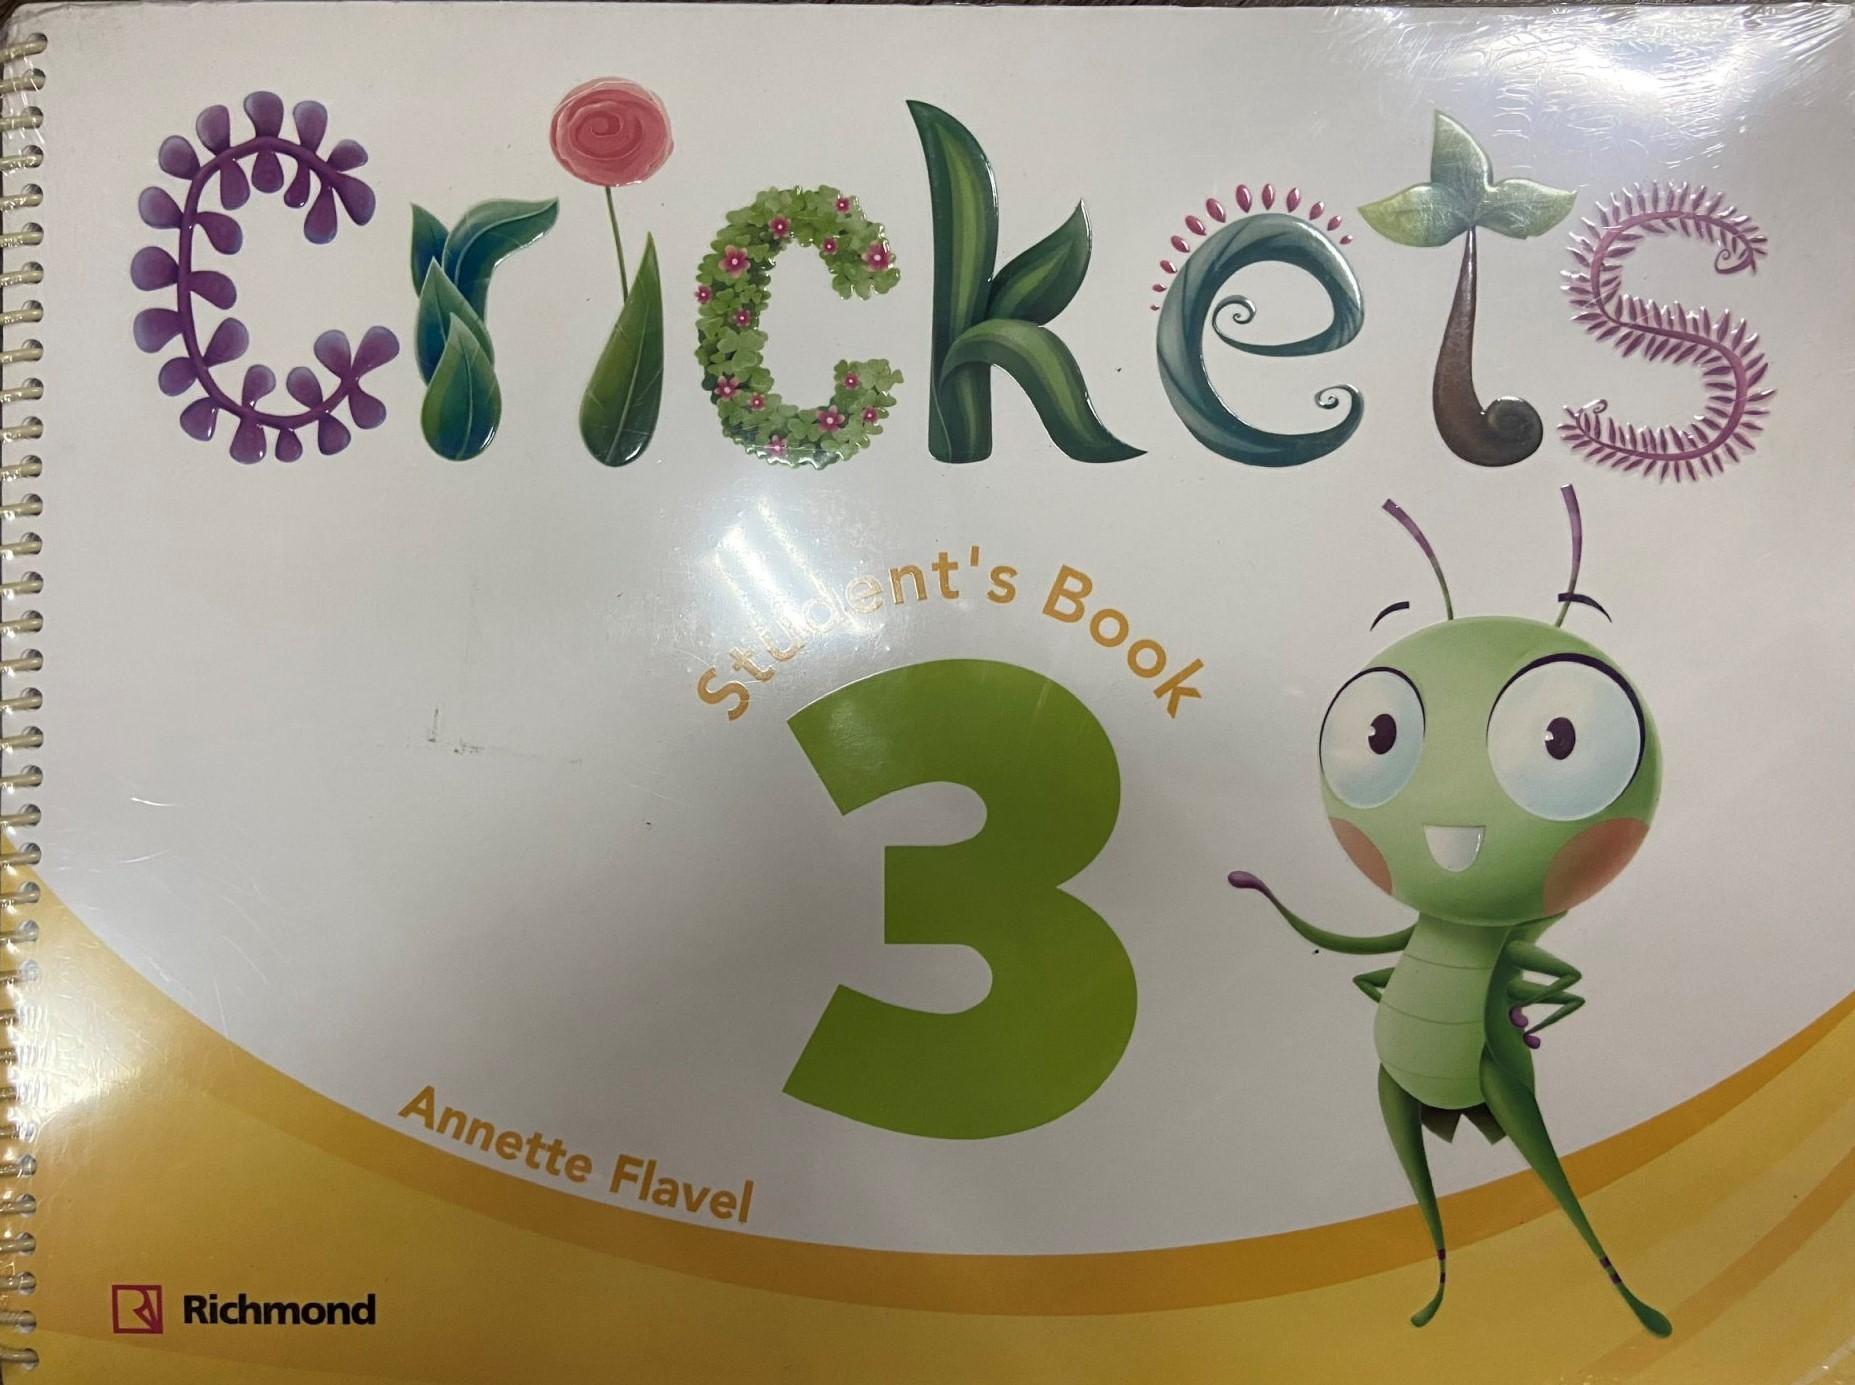 Crickets 3 Pack (Student's Book, Student's CD, Tales )